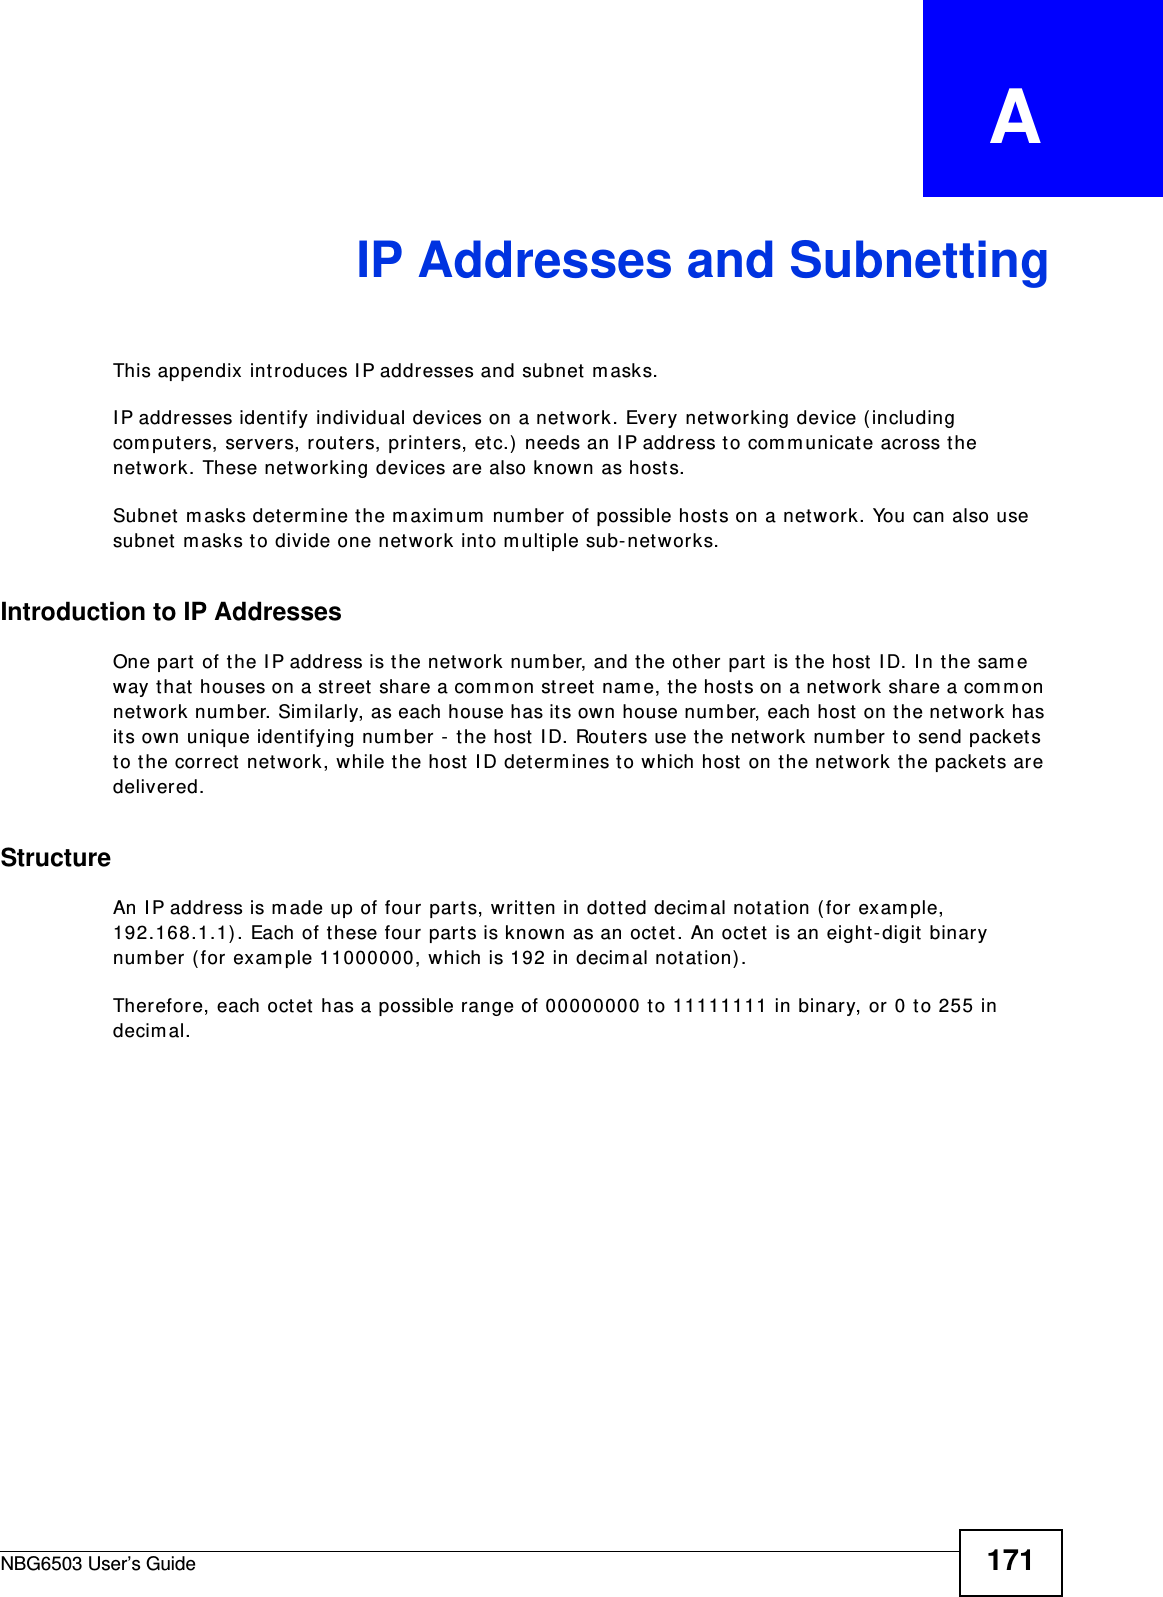 NBG6503 User’s Guide 171APPENDIX   AIP Addresses and SubnettingThis appendix introduces IP addresses and subnet masks. IP addresses identify individual devices on a network. Every networking device (including computers, servers, routers, printers, etc.) needs an IP address to communicate across the network. These networking devices are also known as hosts.Subnet masks determine the maximum number of possible hosts on a network. You can also use subnet masks to divide one network into multiple sub-networks.Introduction to IP AddressesOne part of the IP address is the network number, and the other part is the host ID. In the same way that houses on a street share a common street name, the hosts on a network share a common network number. Similarly, as each house has its own house number, each host on the network has its own unique identifying number - the host ID. Routers use the network number to send packets to the correct network, while the host ID determines to which host on the network the packets are delivered.StructureAn IP address is made up of four parts, written in dotted decimal notation (for example, 192.168.1.1). Each of these four parts is known as an octet. An octet is an eight-digit binary number (for example 11000000, which is 192 in decimal notation). Therefore, each octet has a possible range of 00000000 to 11111111 in binary, or 0 to 255 in decimal.